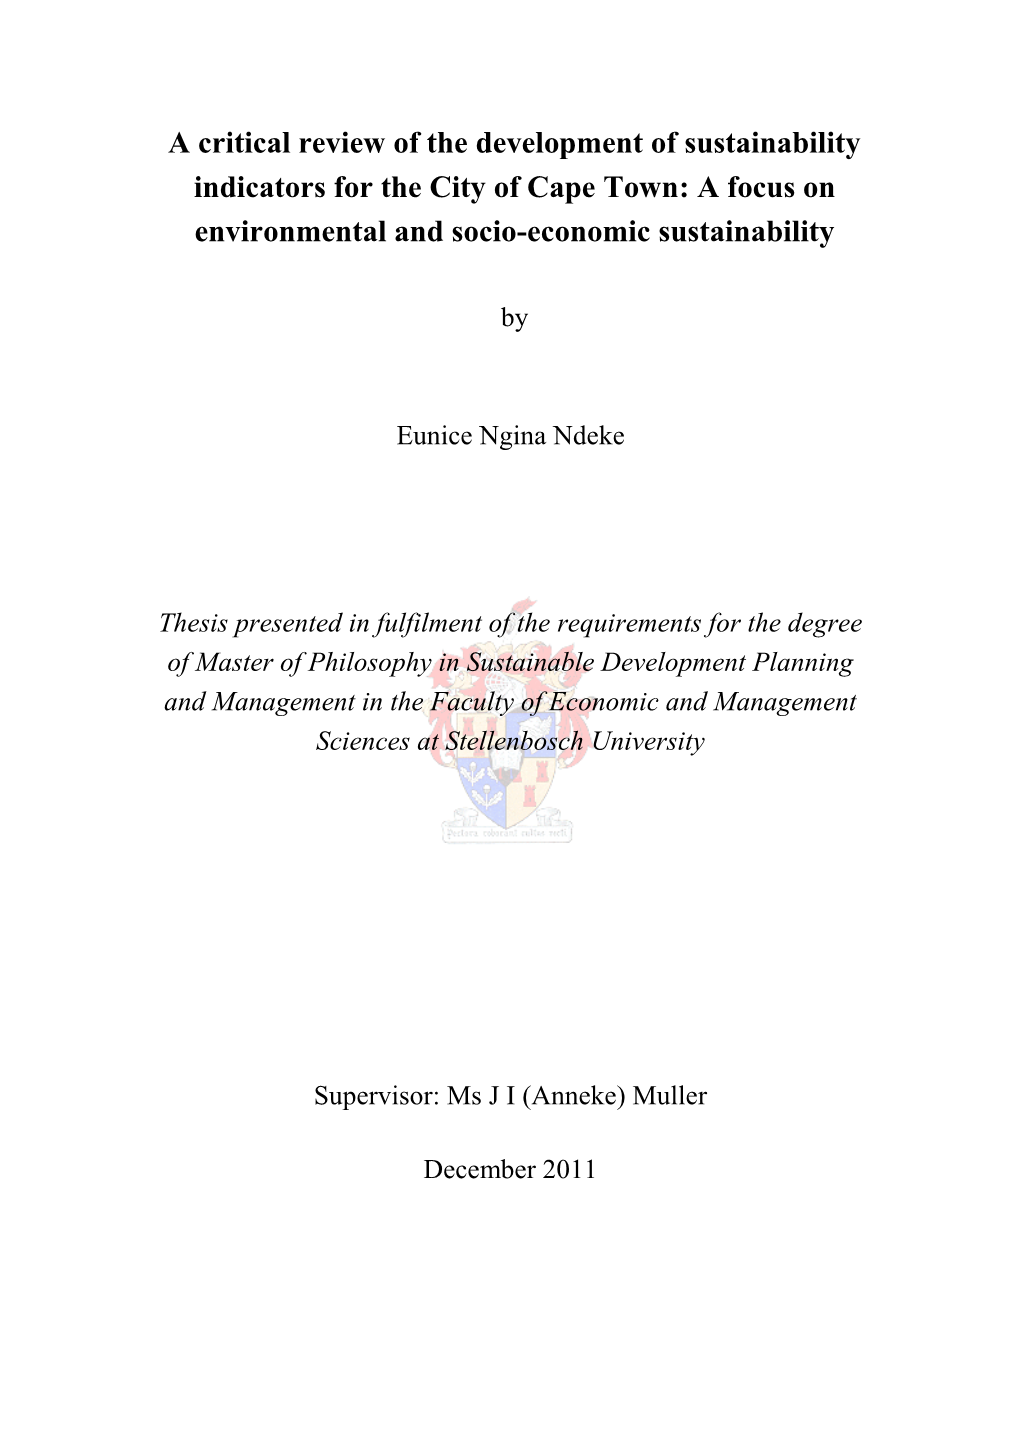 A Critical Review of the Development of Sustainability Indicators for the City of Cape Town: a Focus on Environmental and Socio-Economic Sustainability